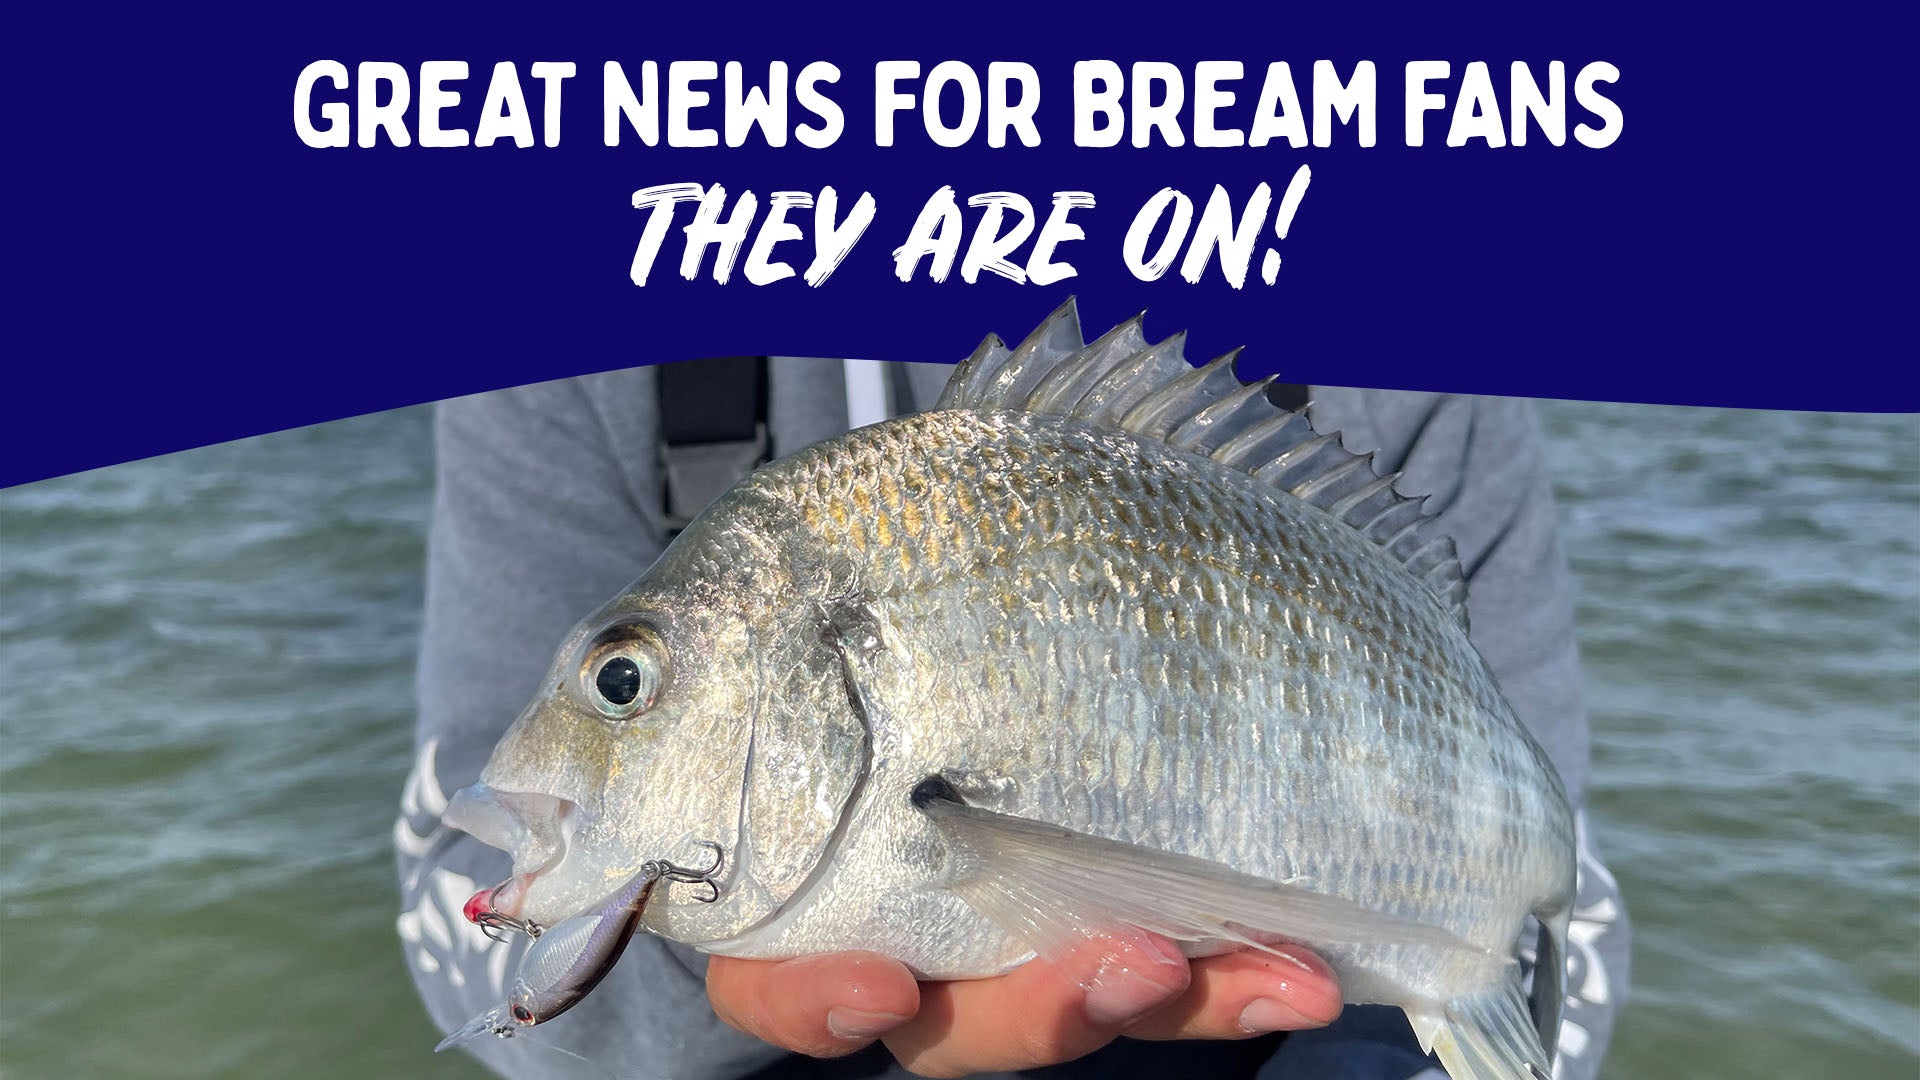 Great News for Bream Fans – They Are On!